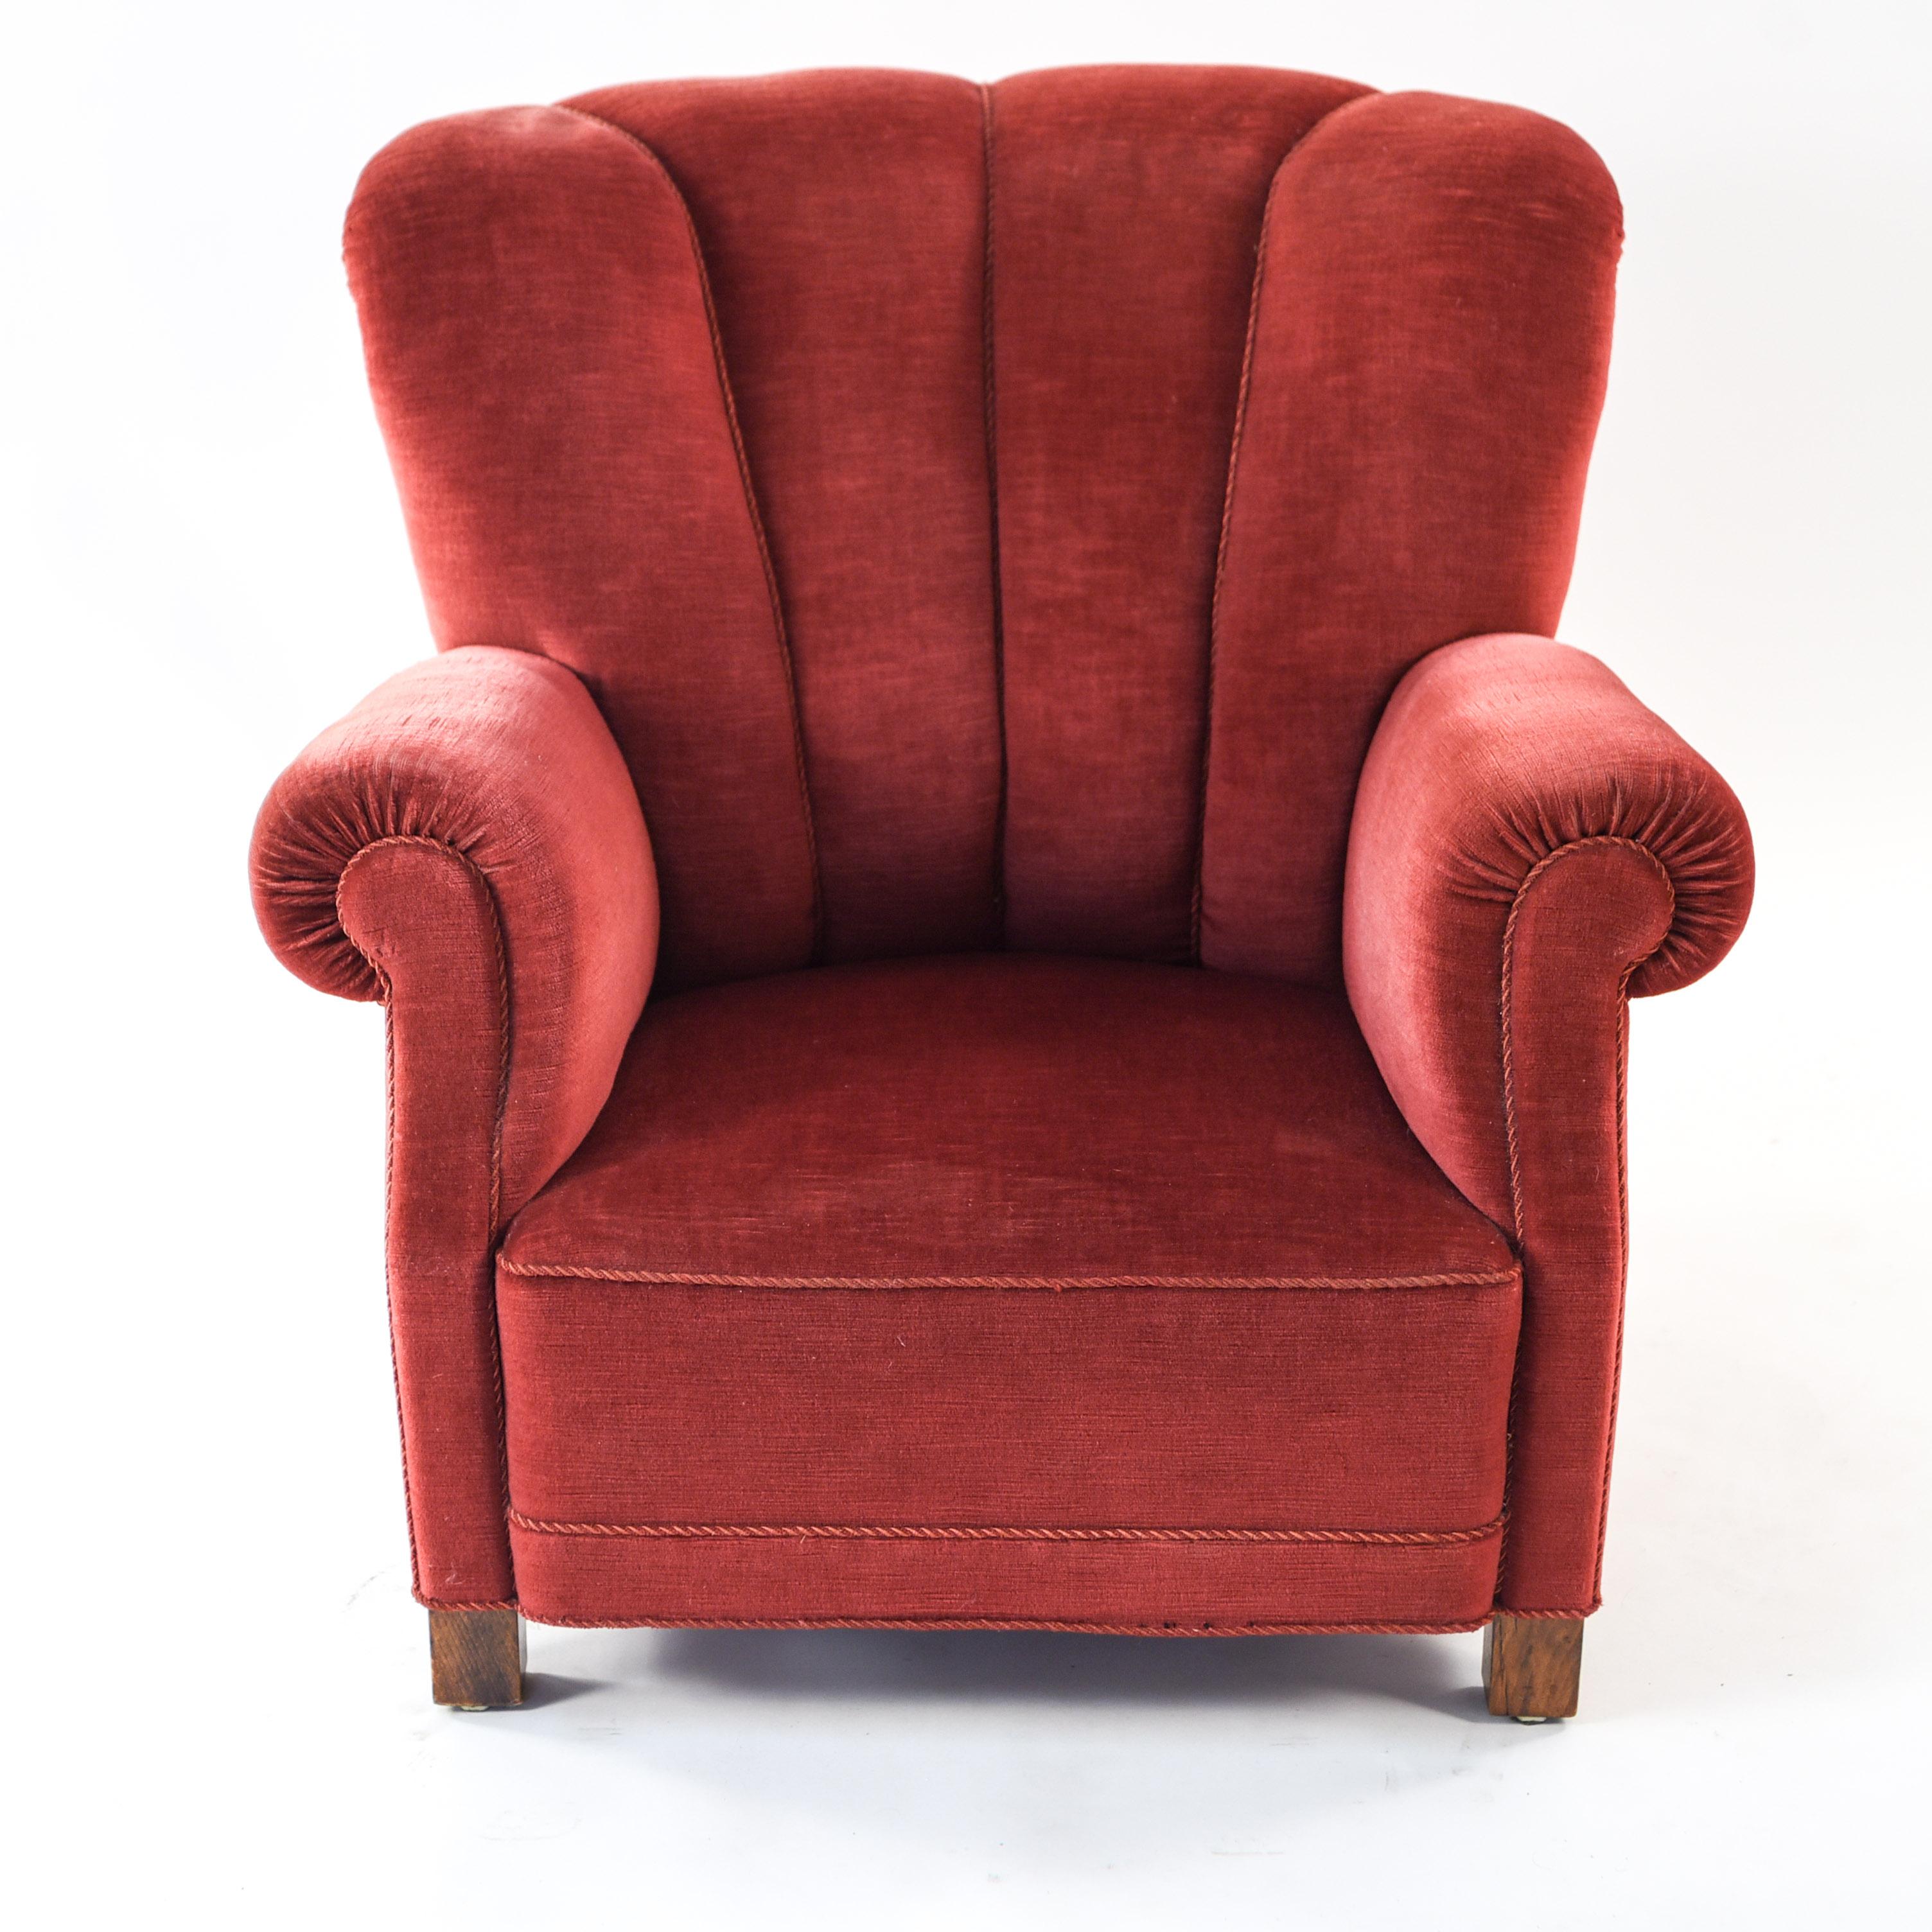 This fabulous wingback chair is fit for a king or queen. Made by Fritz Hansen, circa. 1940s, and believed to be model 1519. Featuring a scalloped back and scroll form arms, this extravagant lounge chair is upholstered mohair.